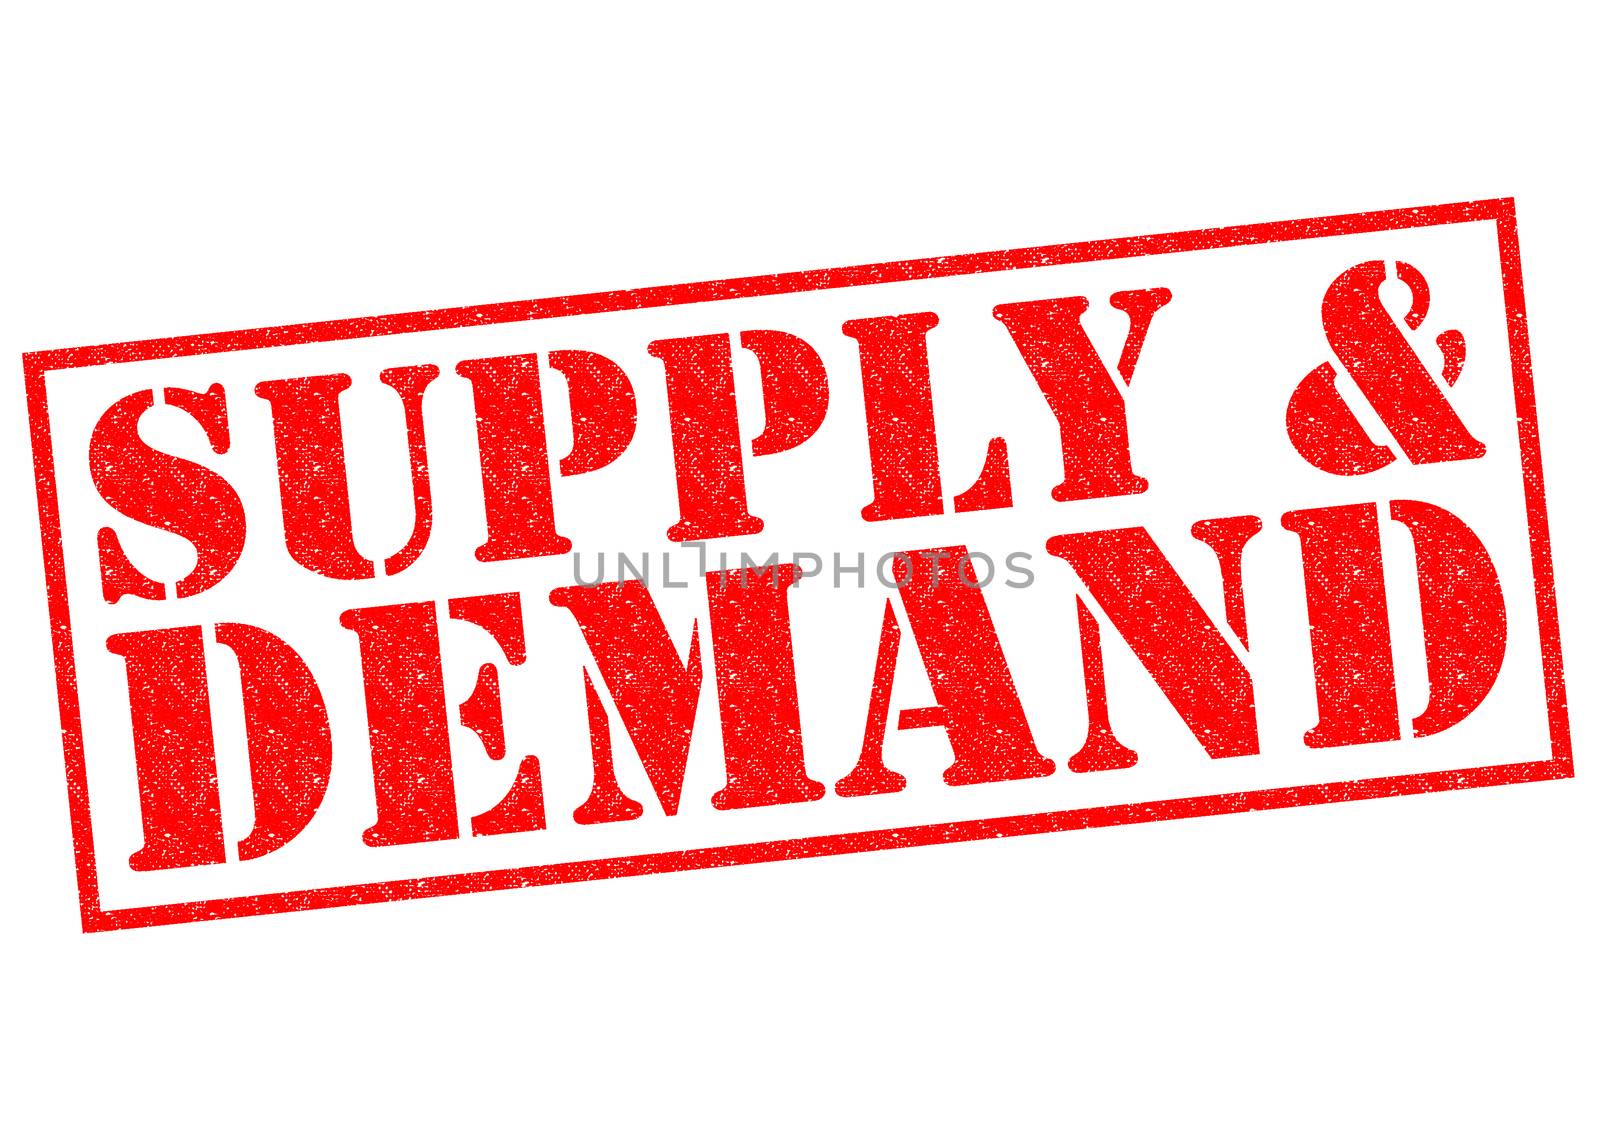 SUPPLY & DEMAND red Rubber Stamp over a white background.